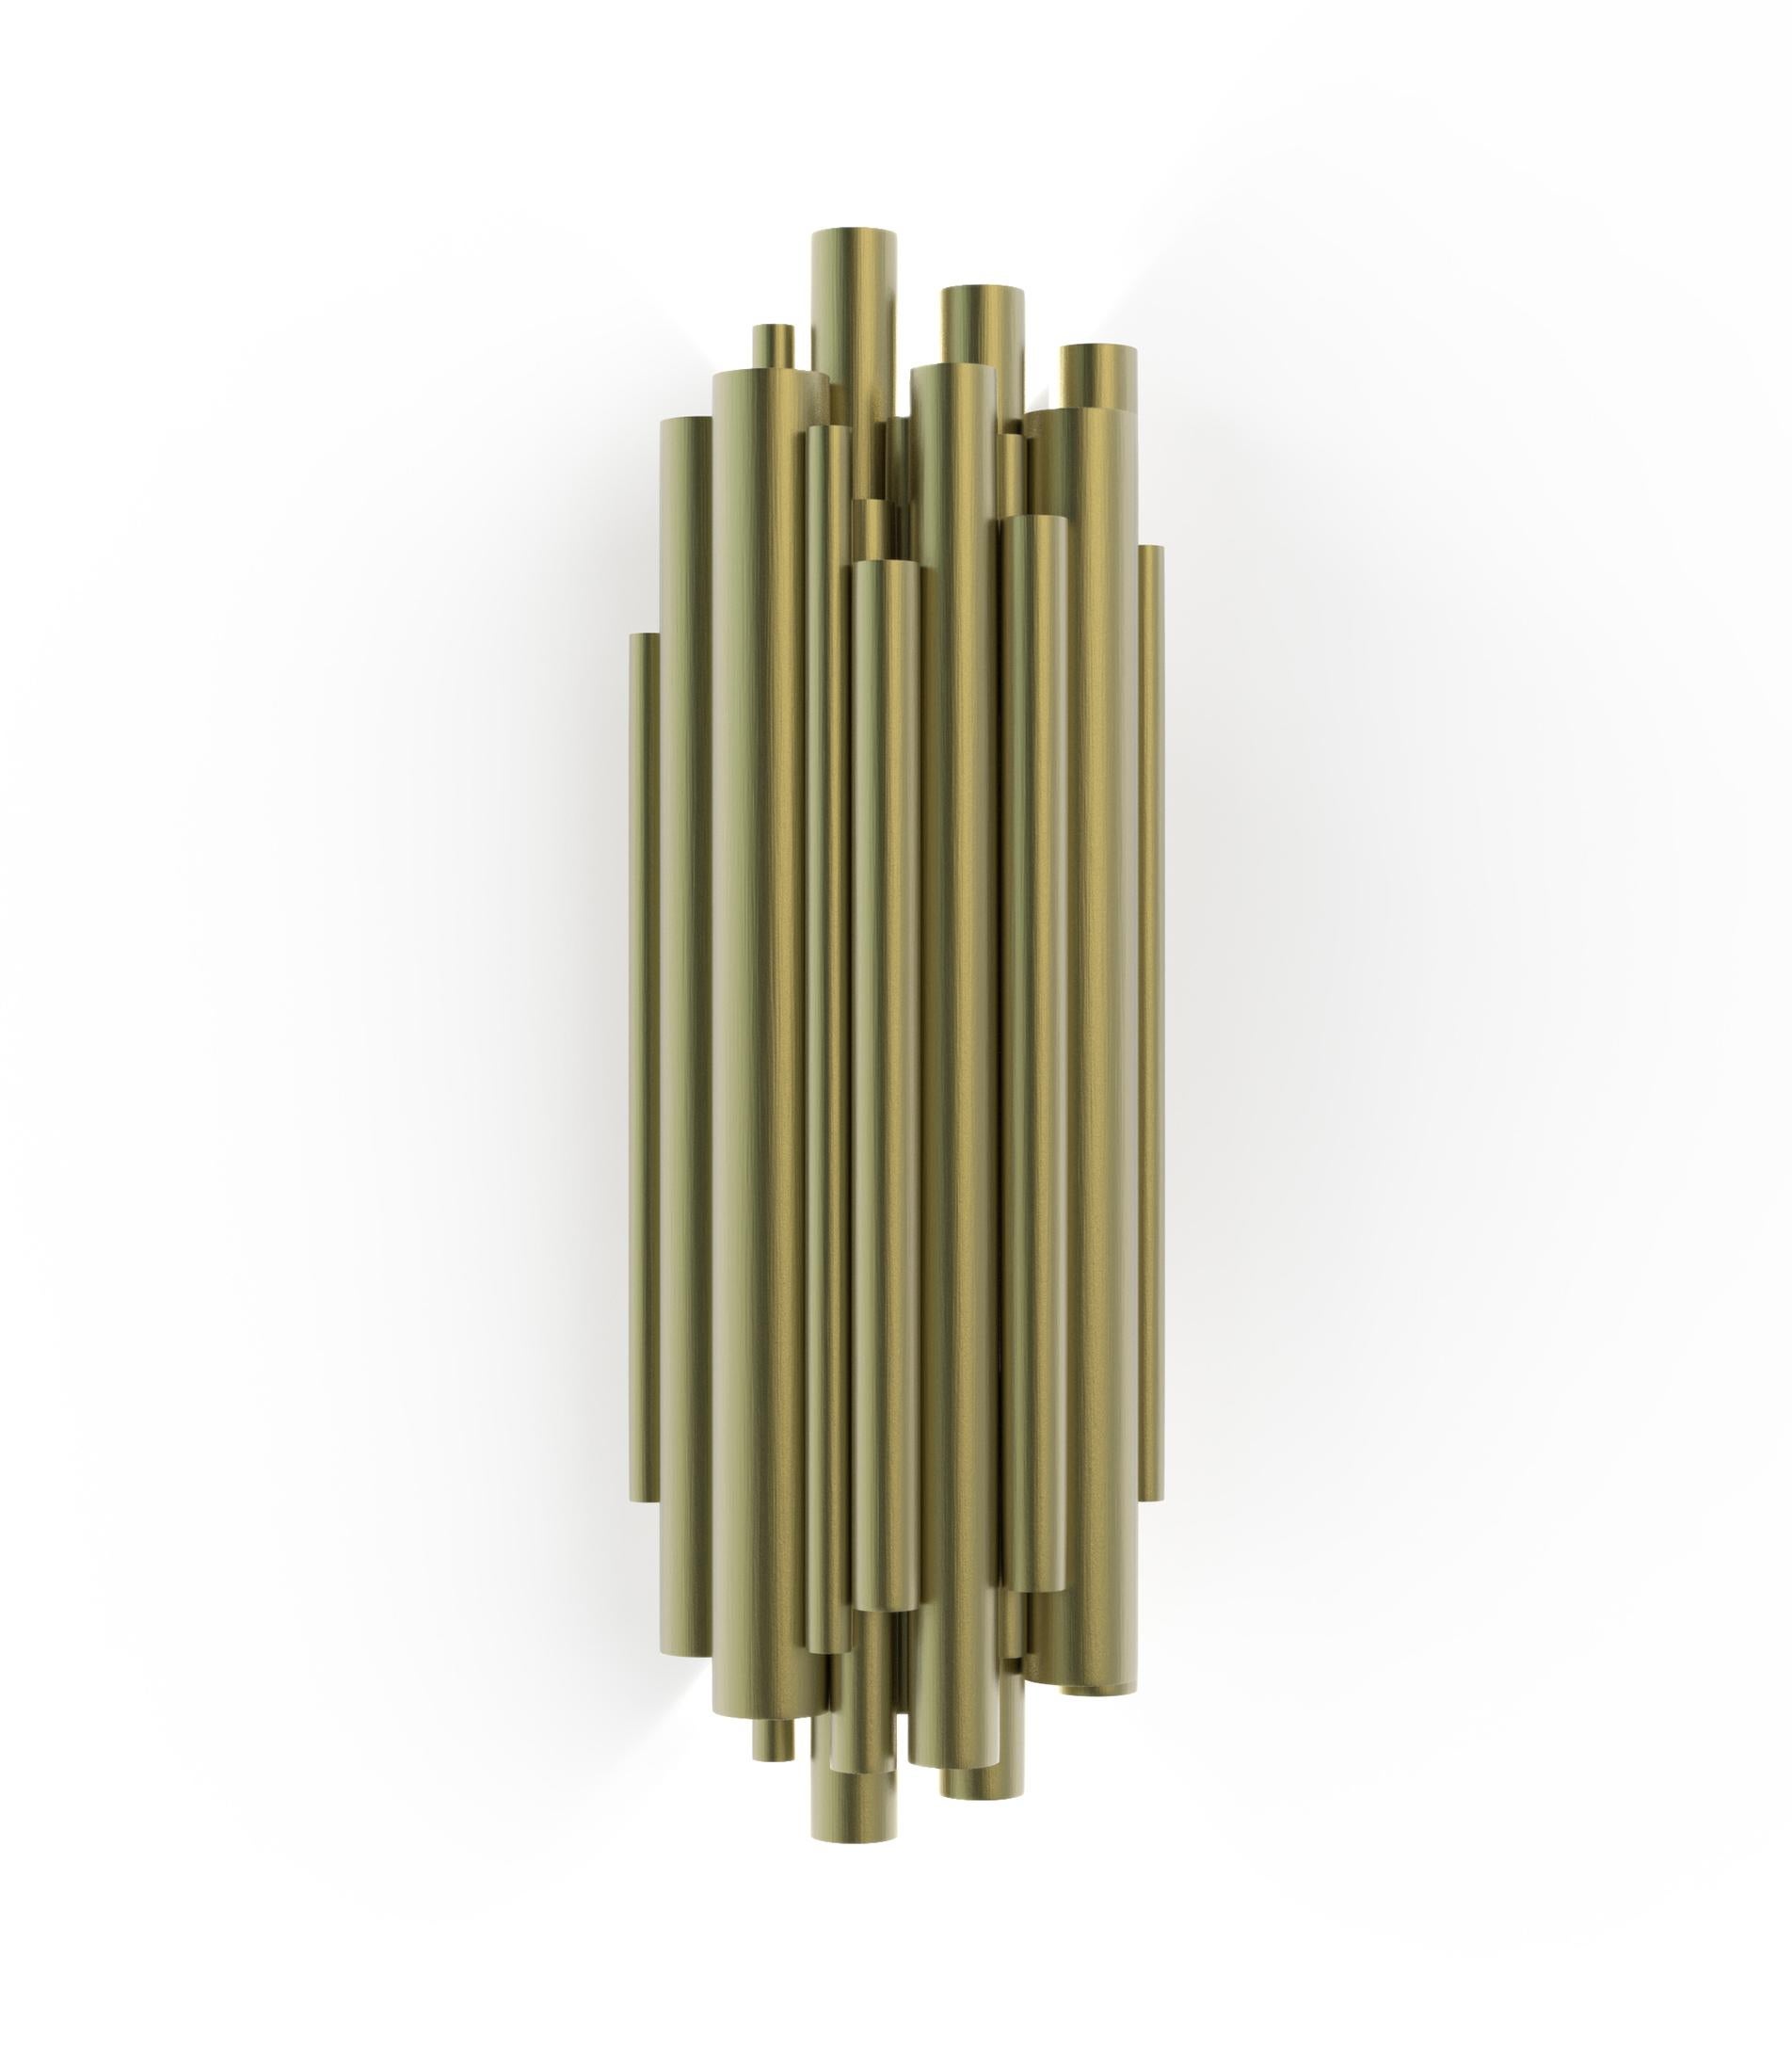 Luxury and Art Deco are synonyms with this Brubeck wall sconce lighting design. Inspired by the timeless musical instrument that is the pipe organ and one of the foremost exponents of jazz, Dave Brubeck, this luxurious wall sconce is a statement